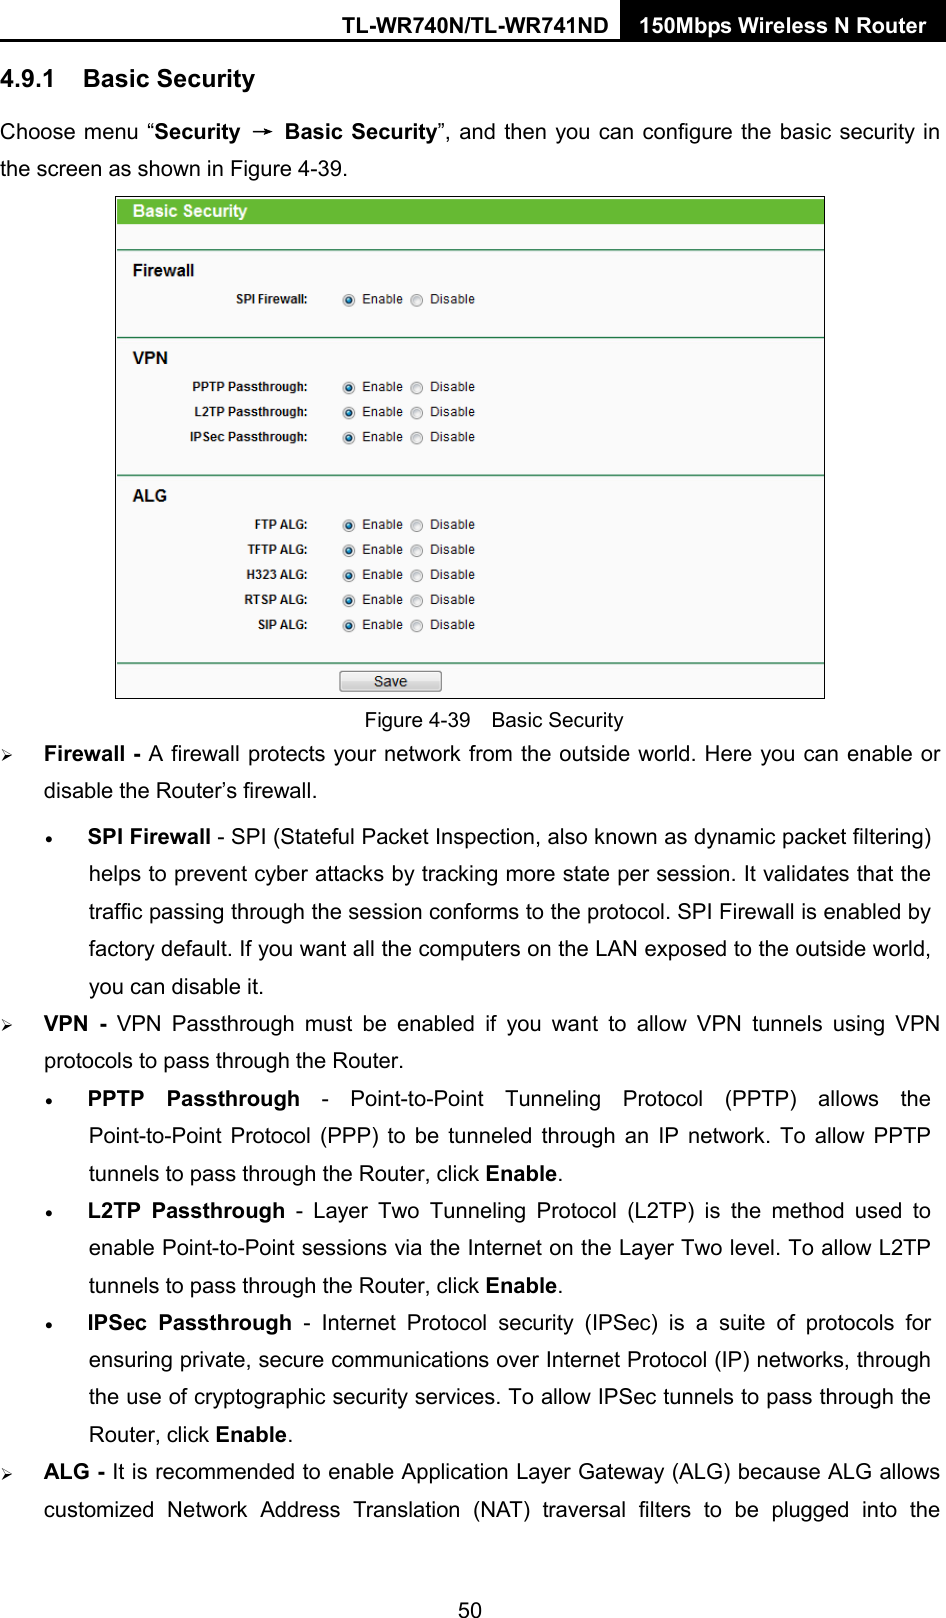 TL-WR740N/TL-WR741ND 150Mbps Wireless N Router  4.9.1 Basic Security Choose menu “Security  → Basic Security”, and then you can configure the basic security in the screen as shown in Figure 4-39.  Figure 4-39  Basic Security  Firewall - A firewall protects your network from the outside world. Here you can enable or disable the Router’s firewall. • SPI Firewall - SPI (Stateful Packet Inspection, also known as dynamic packet filtering) helps to prevent cyber attacks by tracking more state per session. It validates that the traffic passing through the session conforms to the protocol. SPI Firewall is enabled by factory default. If you want all the computers on the LAN exposed to the outside world, you can disable it.    VPN  -  VPN Passthrough must be enabled if you want to allow VPN tunnels using VPN protocols to pass through the Router. • PPTP Passthrough - Point-to-Point Tunneling Protocol (PPTP) allows the Point-to-Point Protocol (PPP) to be tunneled through an IP network. To allow PPTP tunnels to pass through the Router, click Enable. • L2TP Passthrough  -  Layer Two Tunneling Protocol (L2TP) is the method used to enable Point-to-Point sessions via the Internet on the Layer Two level. To allow L2TP tunnels to pass through the Router, click Enable. • IPSec Passthrough  -  Internet Protocol security (IPSec) is a suite of protocols for ensuring private, secure communications over Internet Protocol (IP) networks, through the use of cryptographic security services. To allow IPSec tunnels to pass through the Router, click Enable.  ALG - It is recommended to enable Application Layer Gateway (ALG) because ALG allows customized Network Address Translation (NAT) traversal filters to be plugged into the 50 